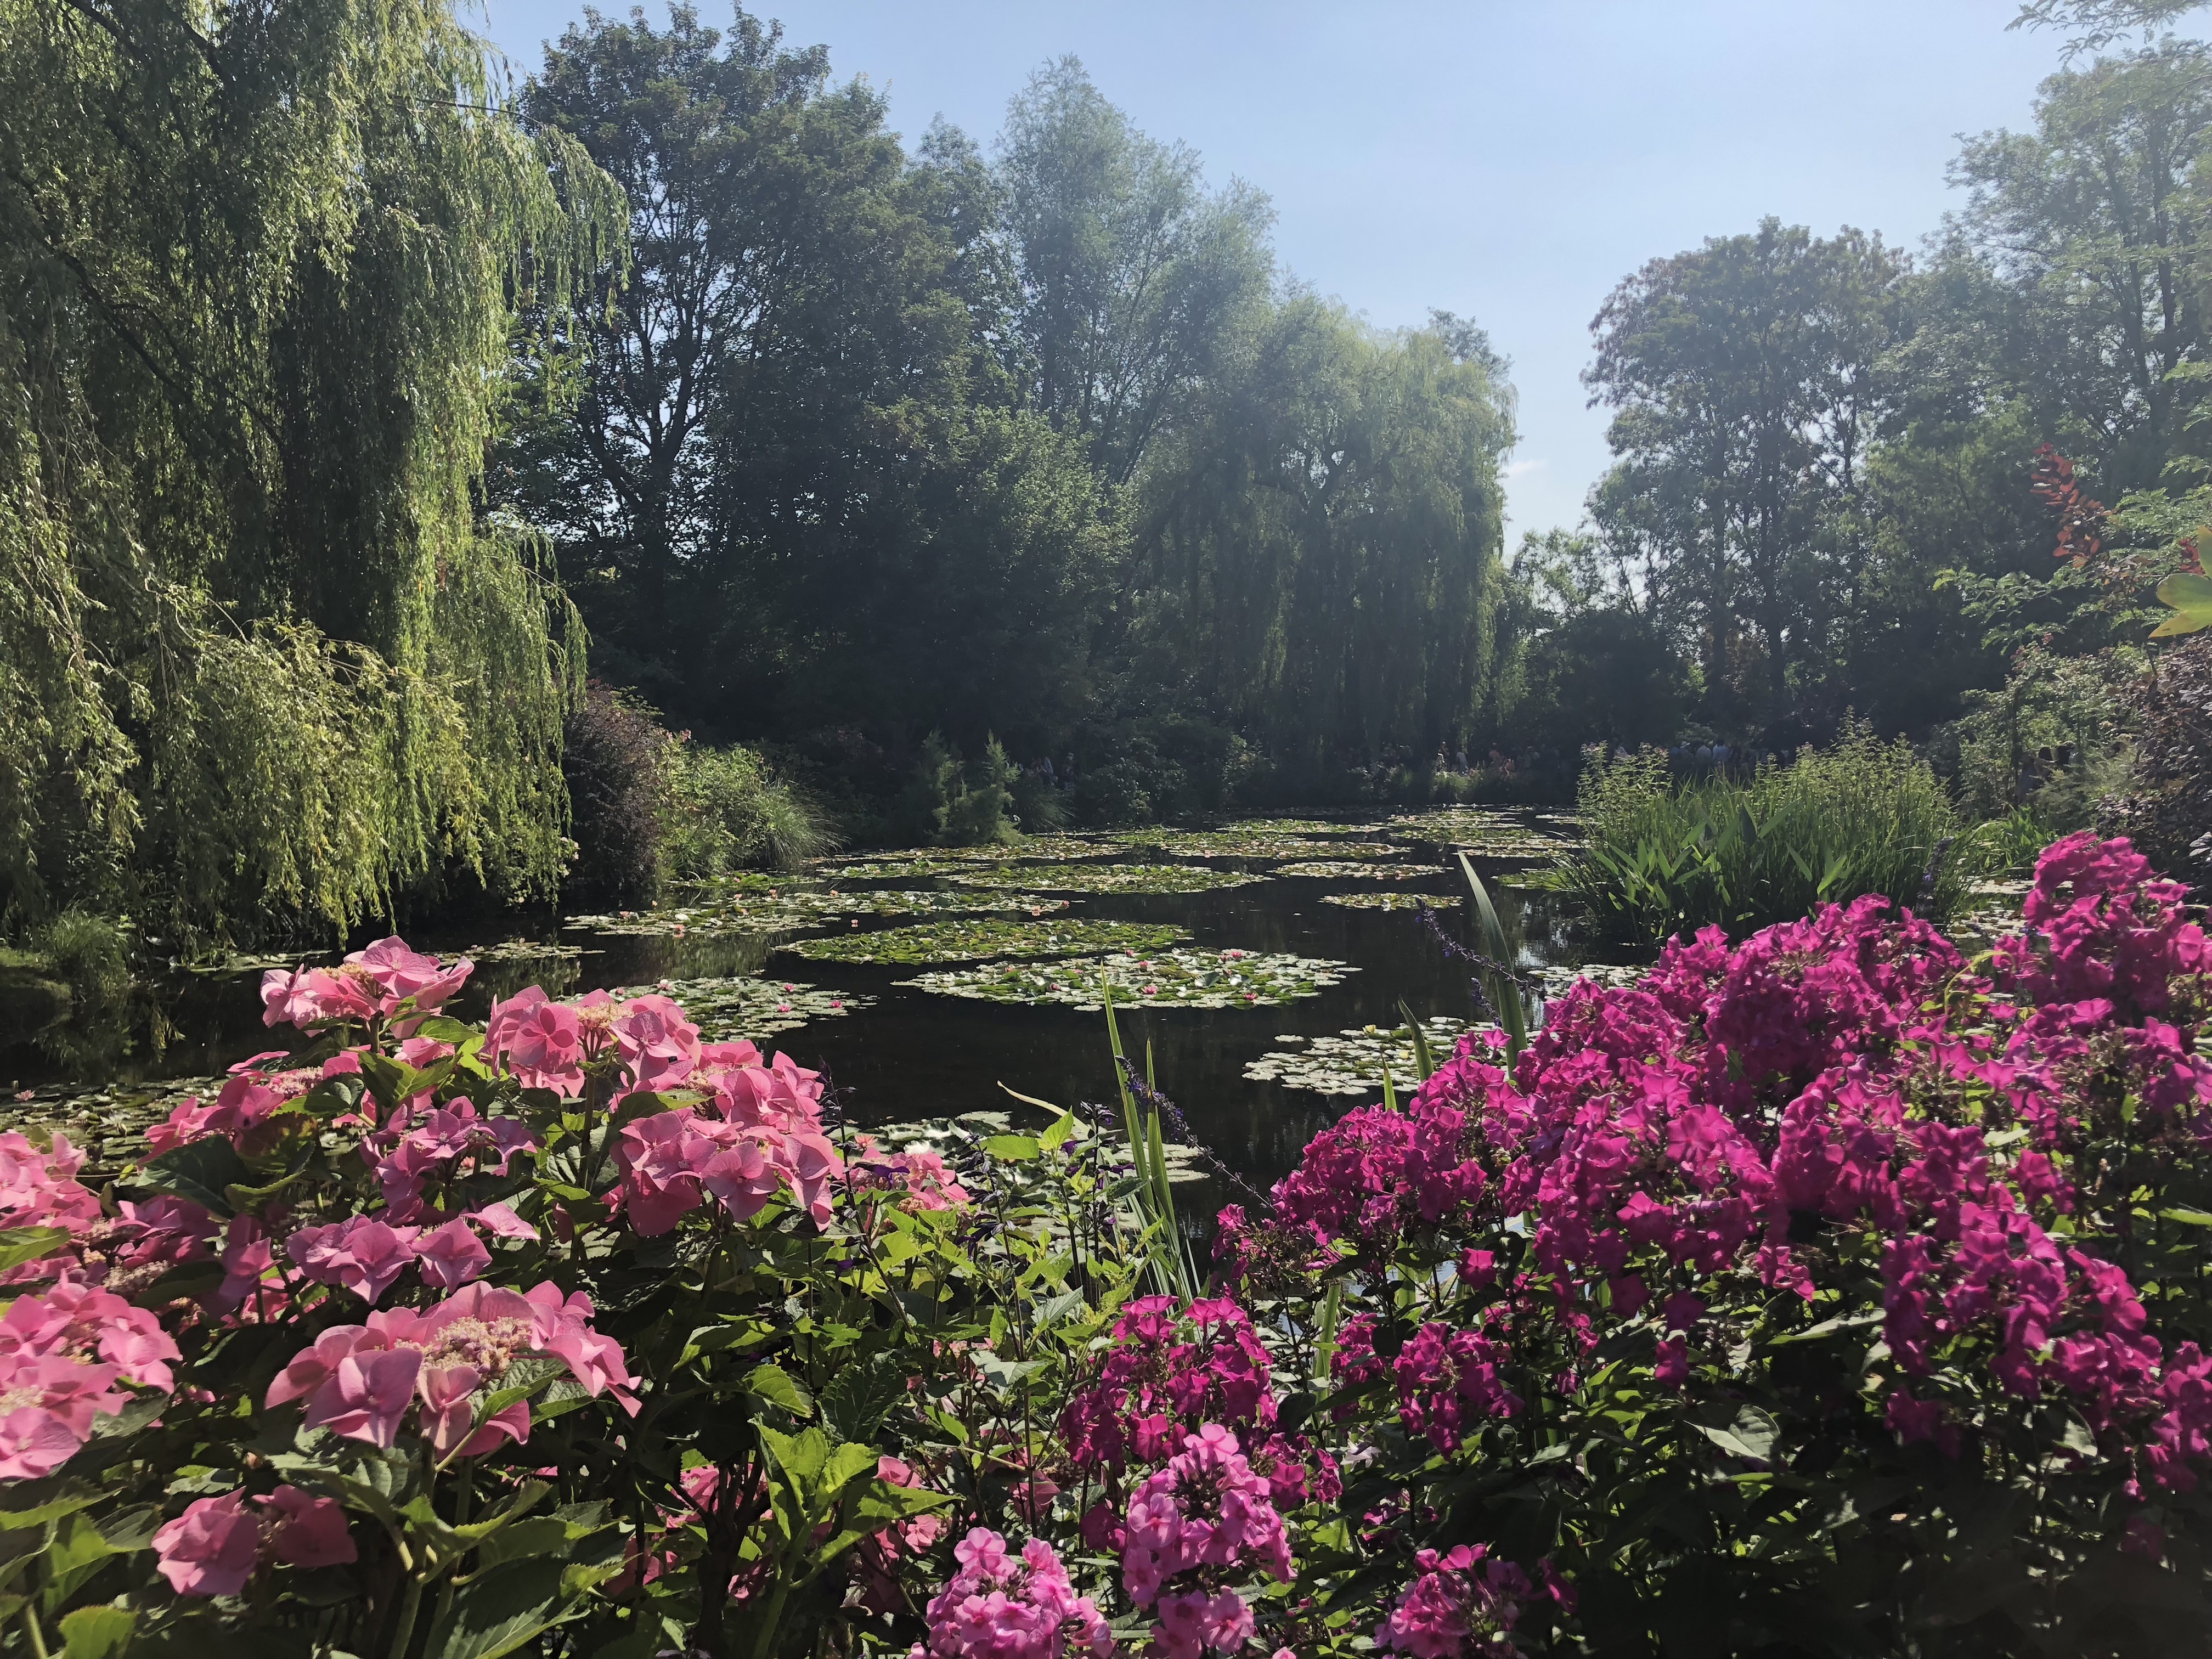 Claude Monet’s Giverny: My Time with the Famous Waterlilies and Those Copper Pots & Pans